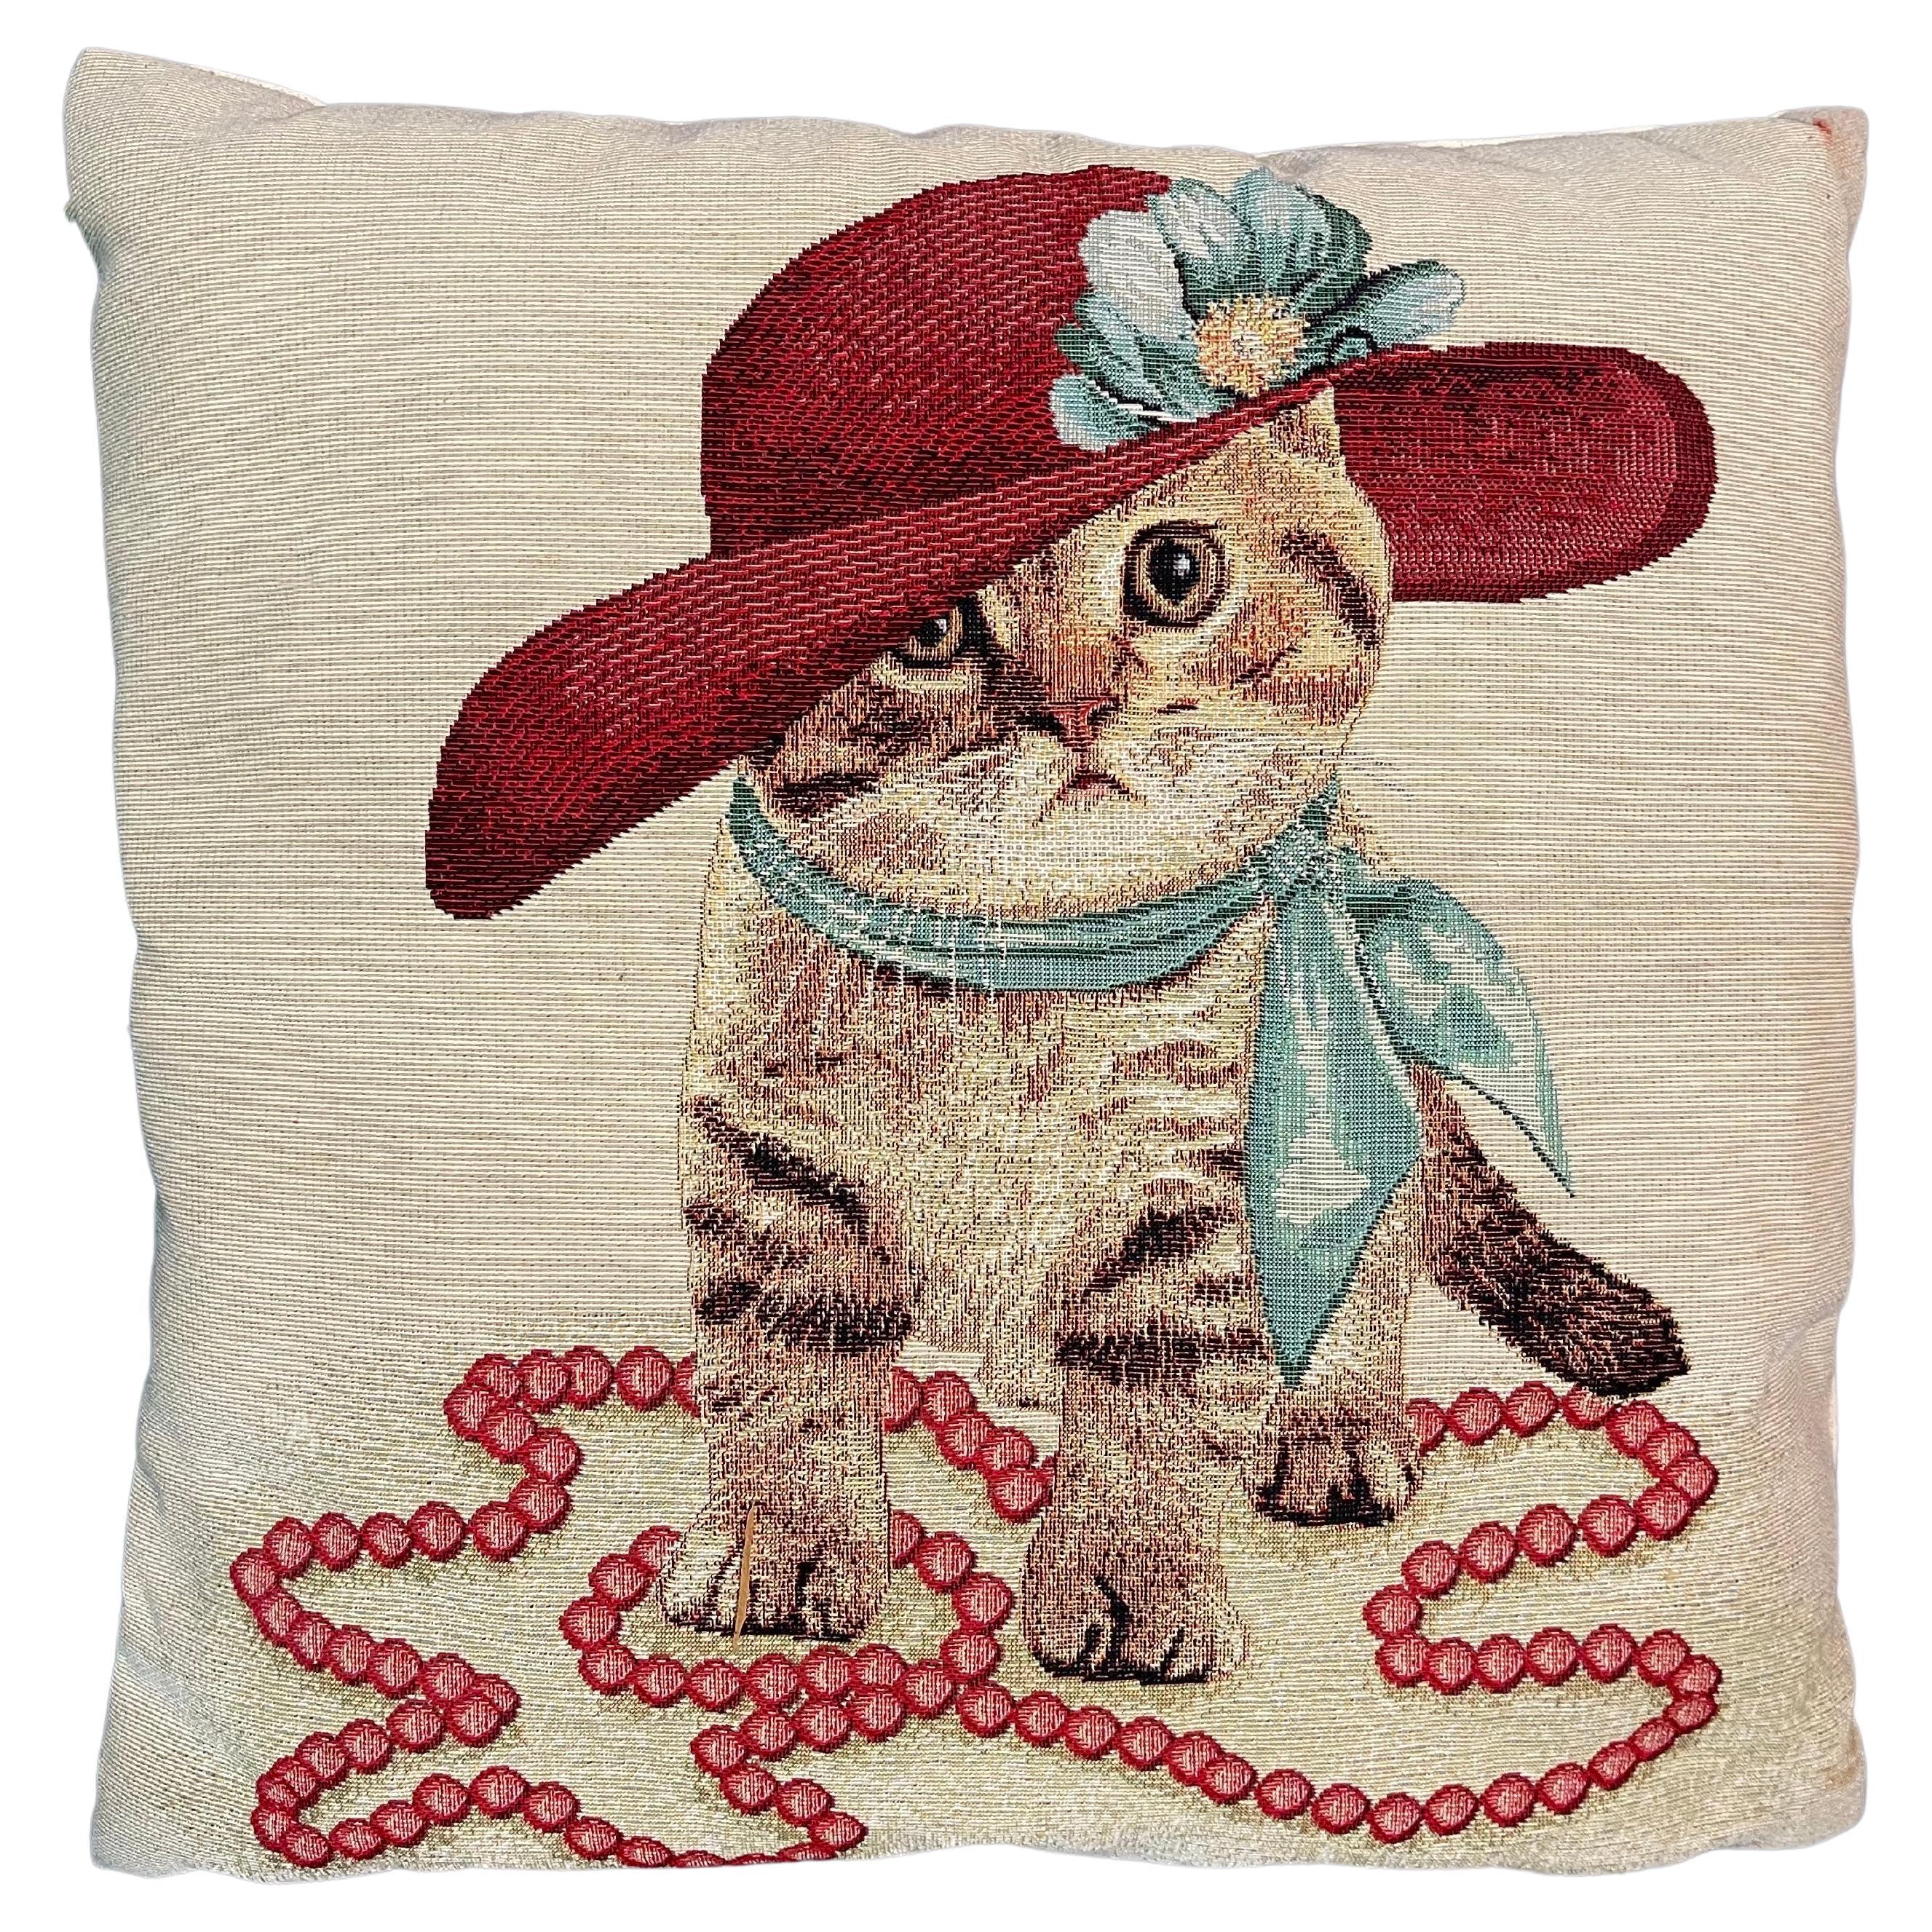 Vintage Italian Colored Pillow with a Cat